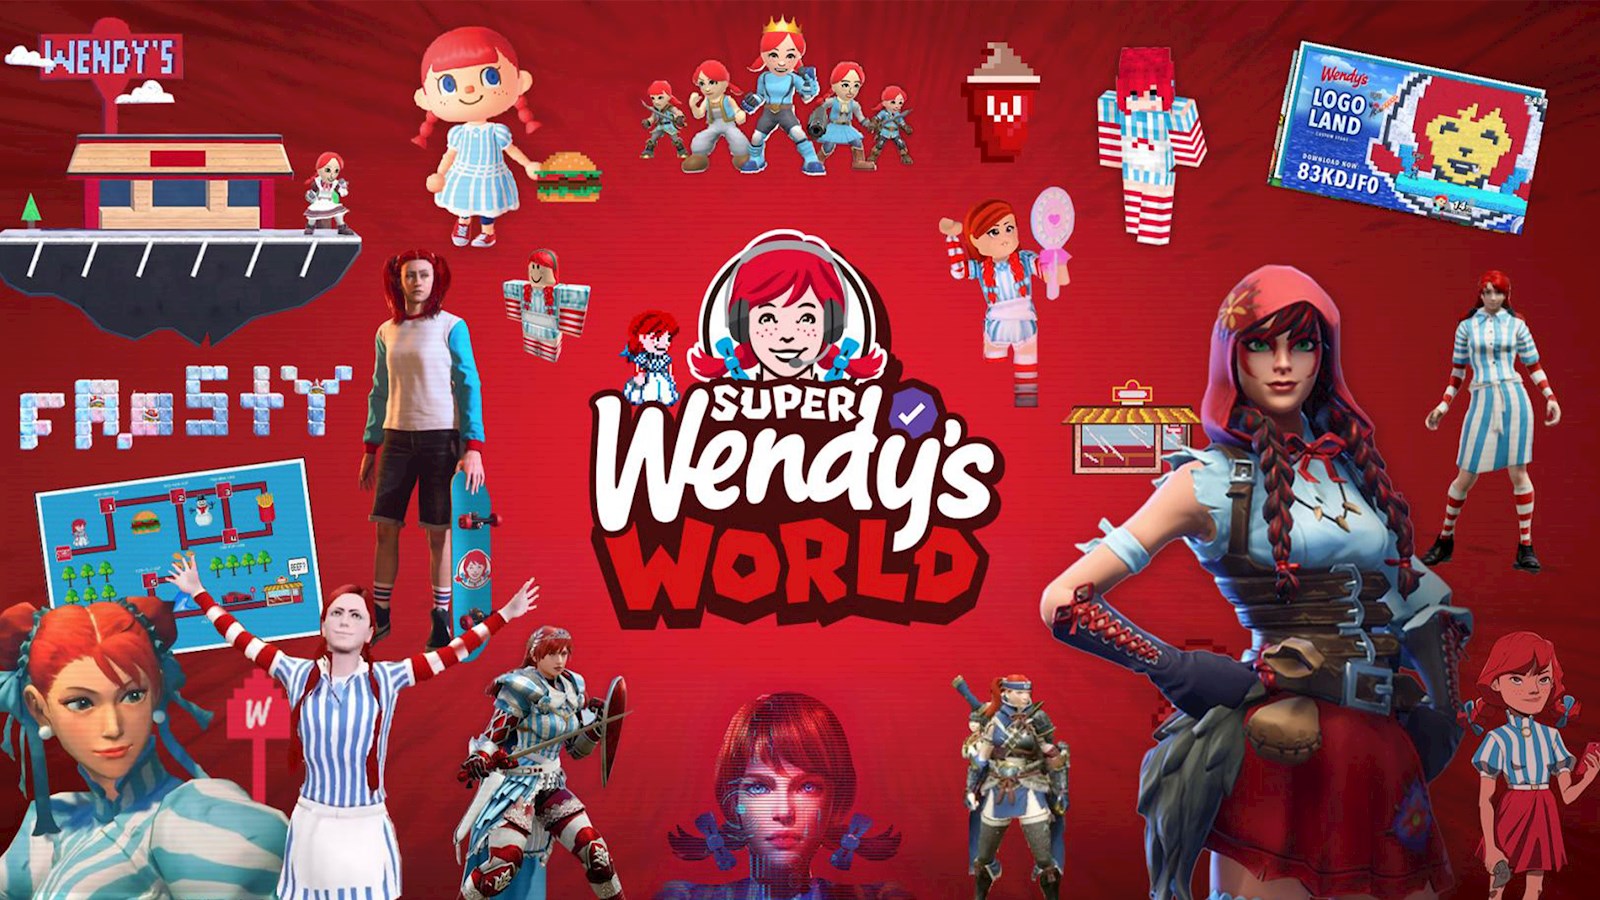 Wendy's character in different games 